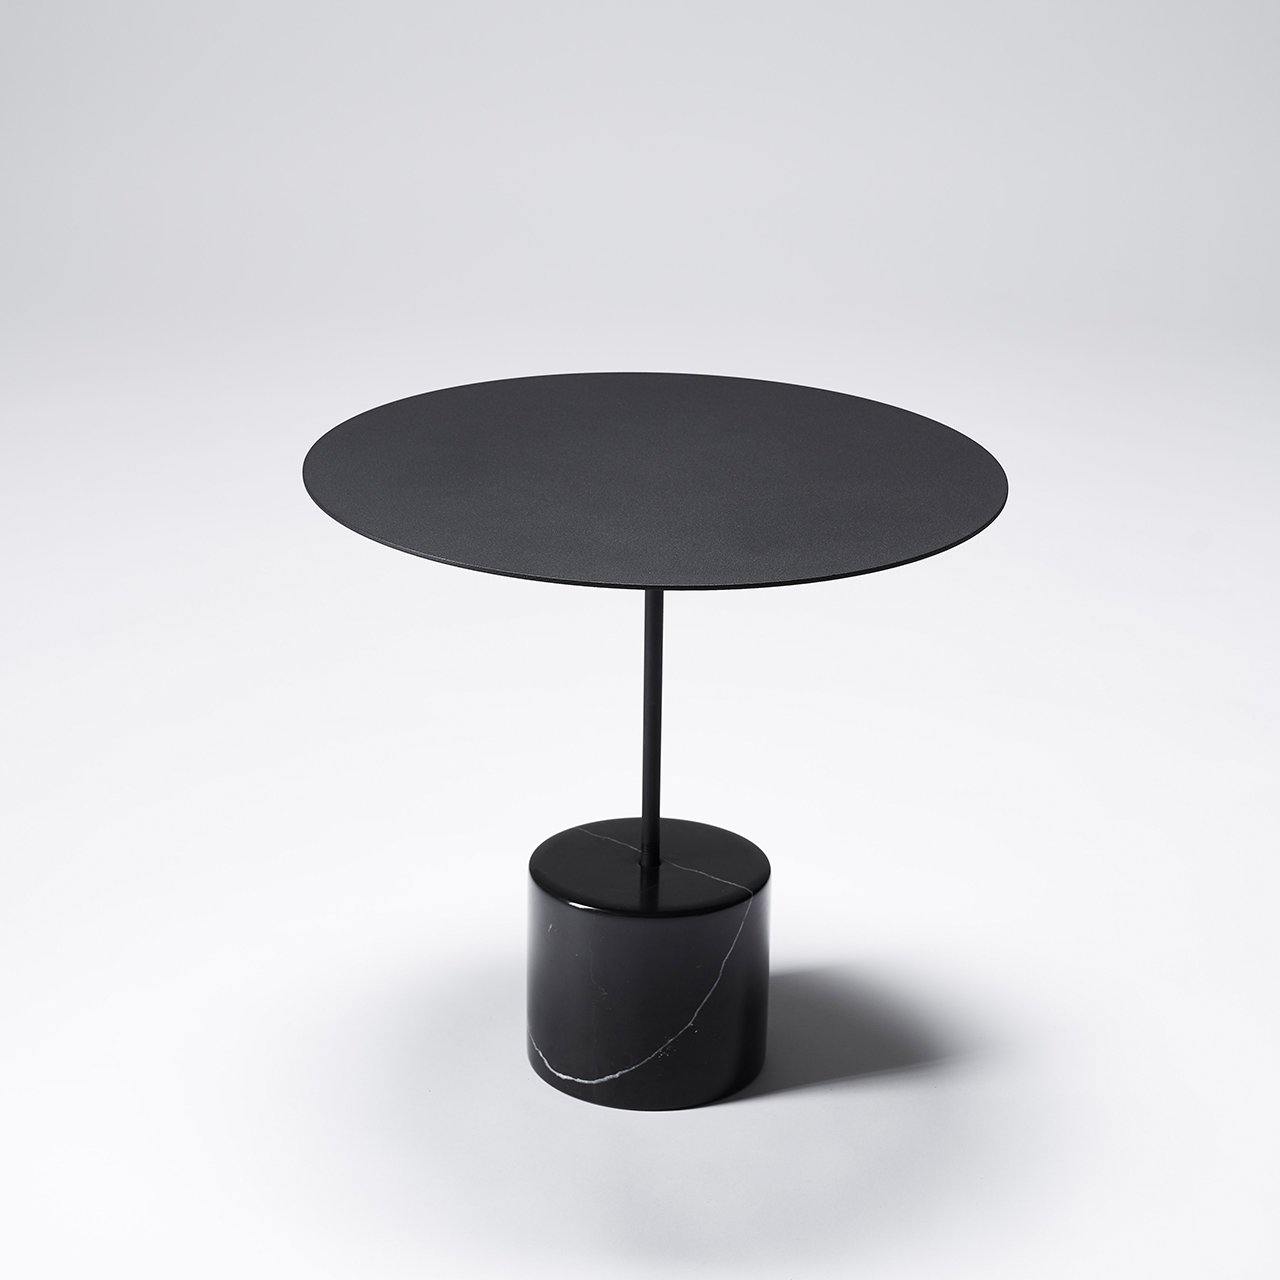 CALIBRE - Low Side Table - POET SDN BHD 